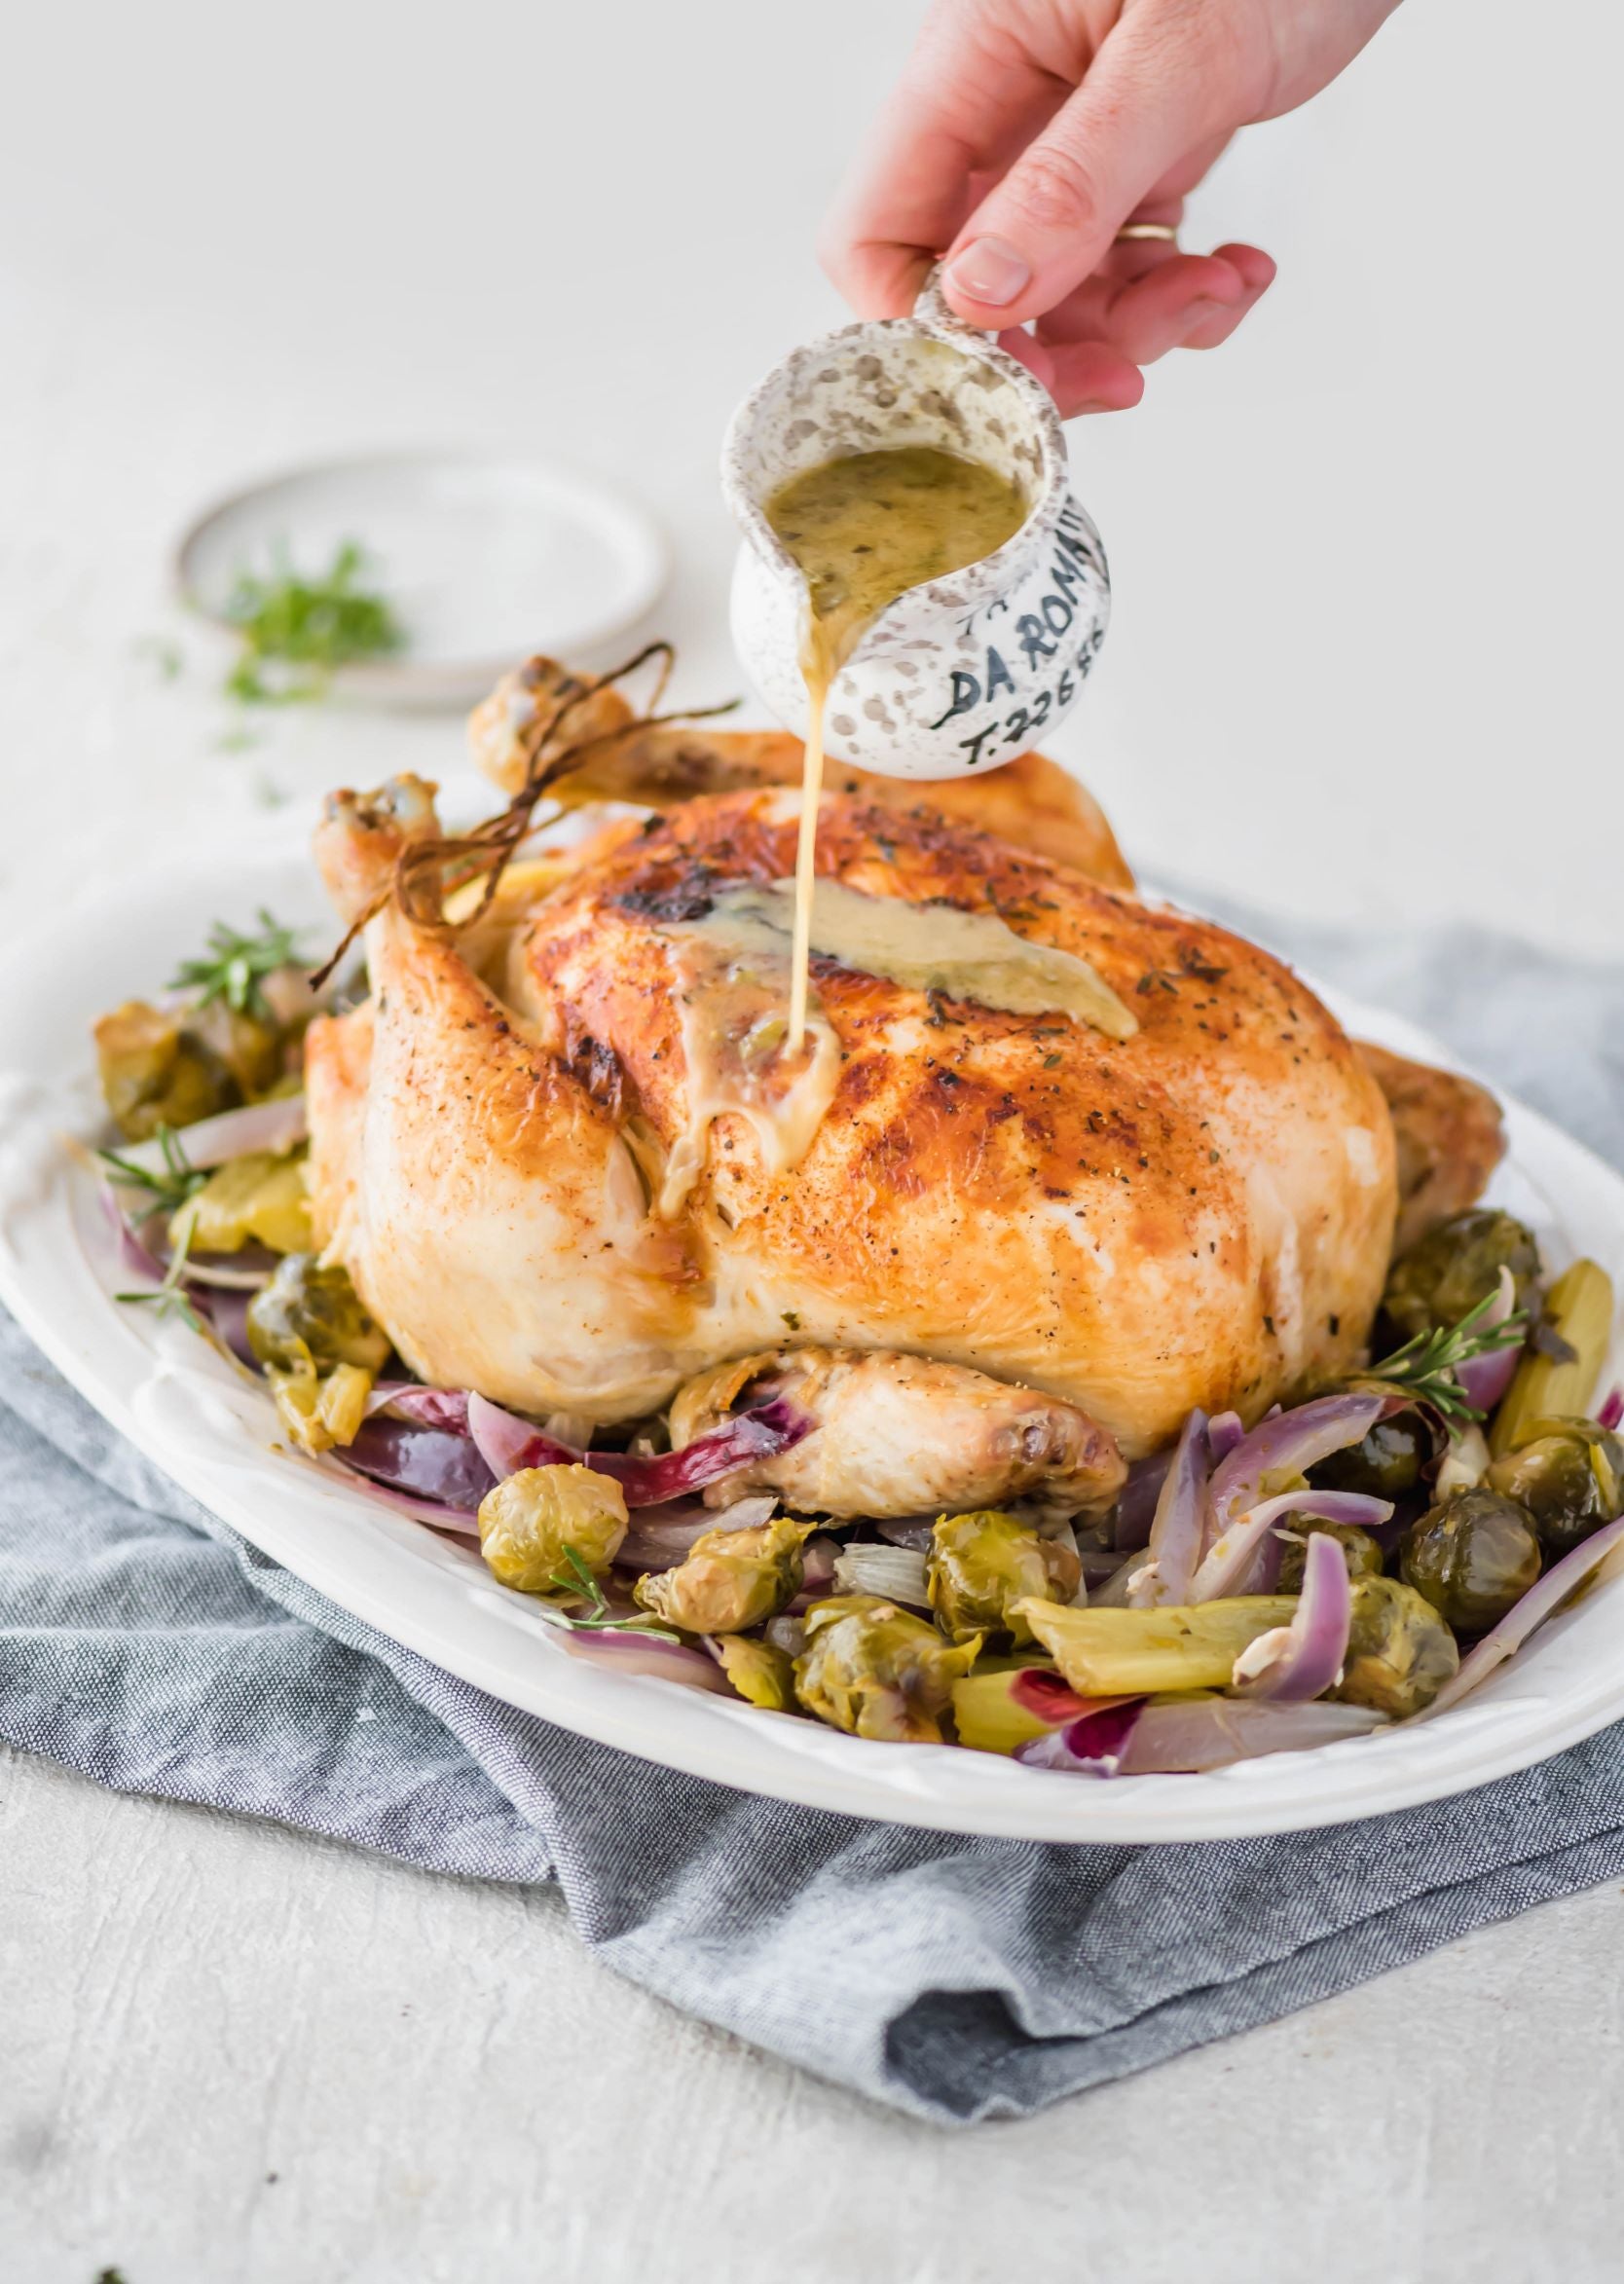 Herbed Chicken & Brussels Sprouts